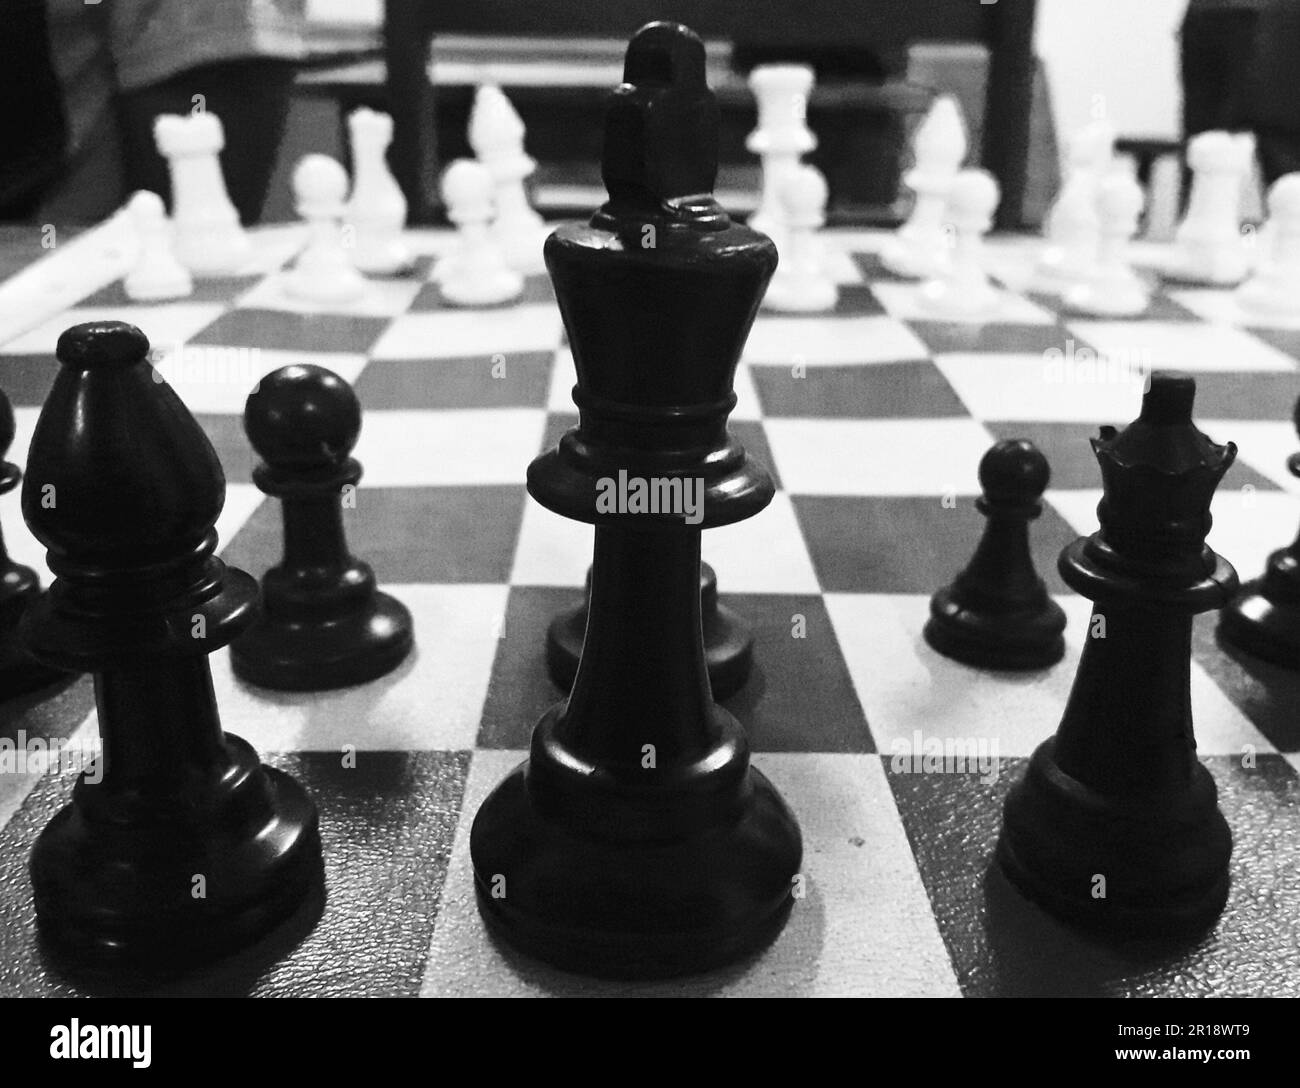 Close-up shot of a chess set. Concept of challenge, competition, strategy, victory, business, team management and leadership. B&W Landscape Stock Photo